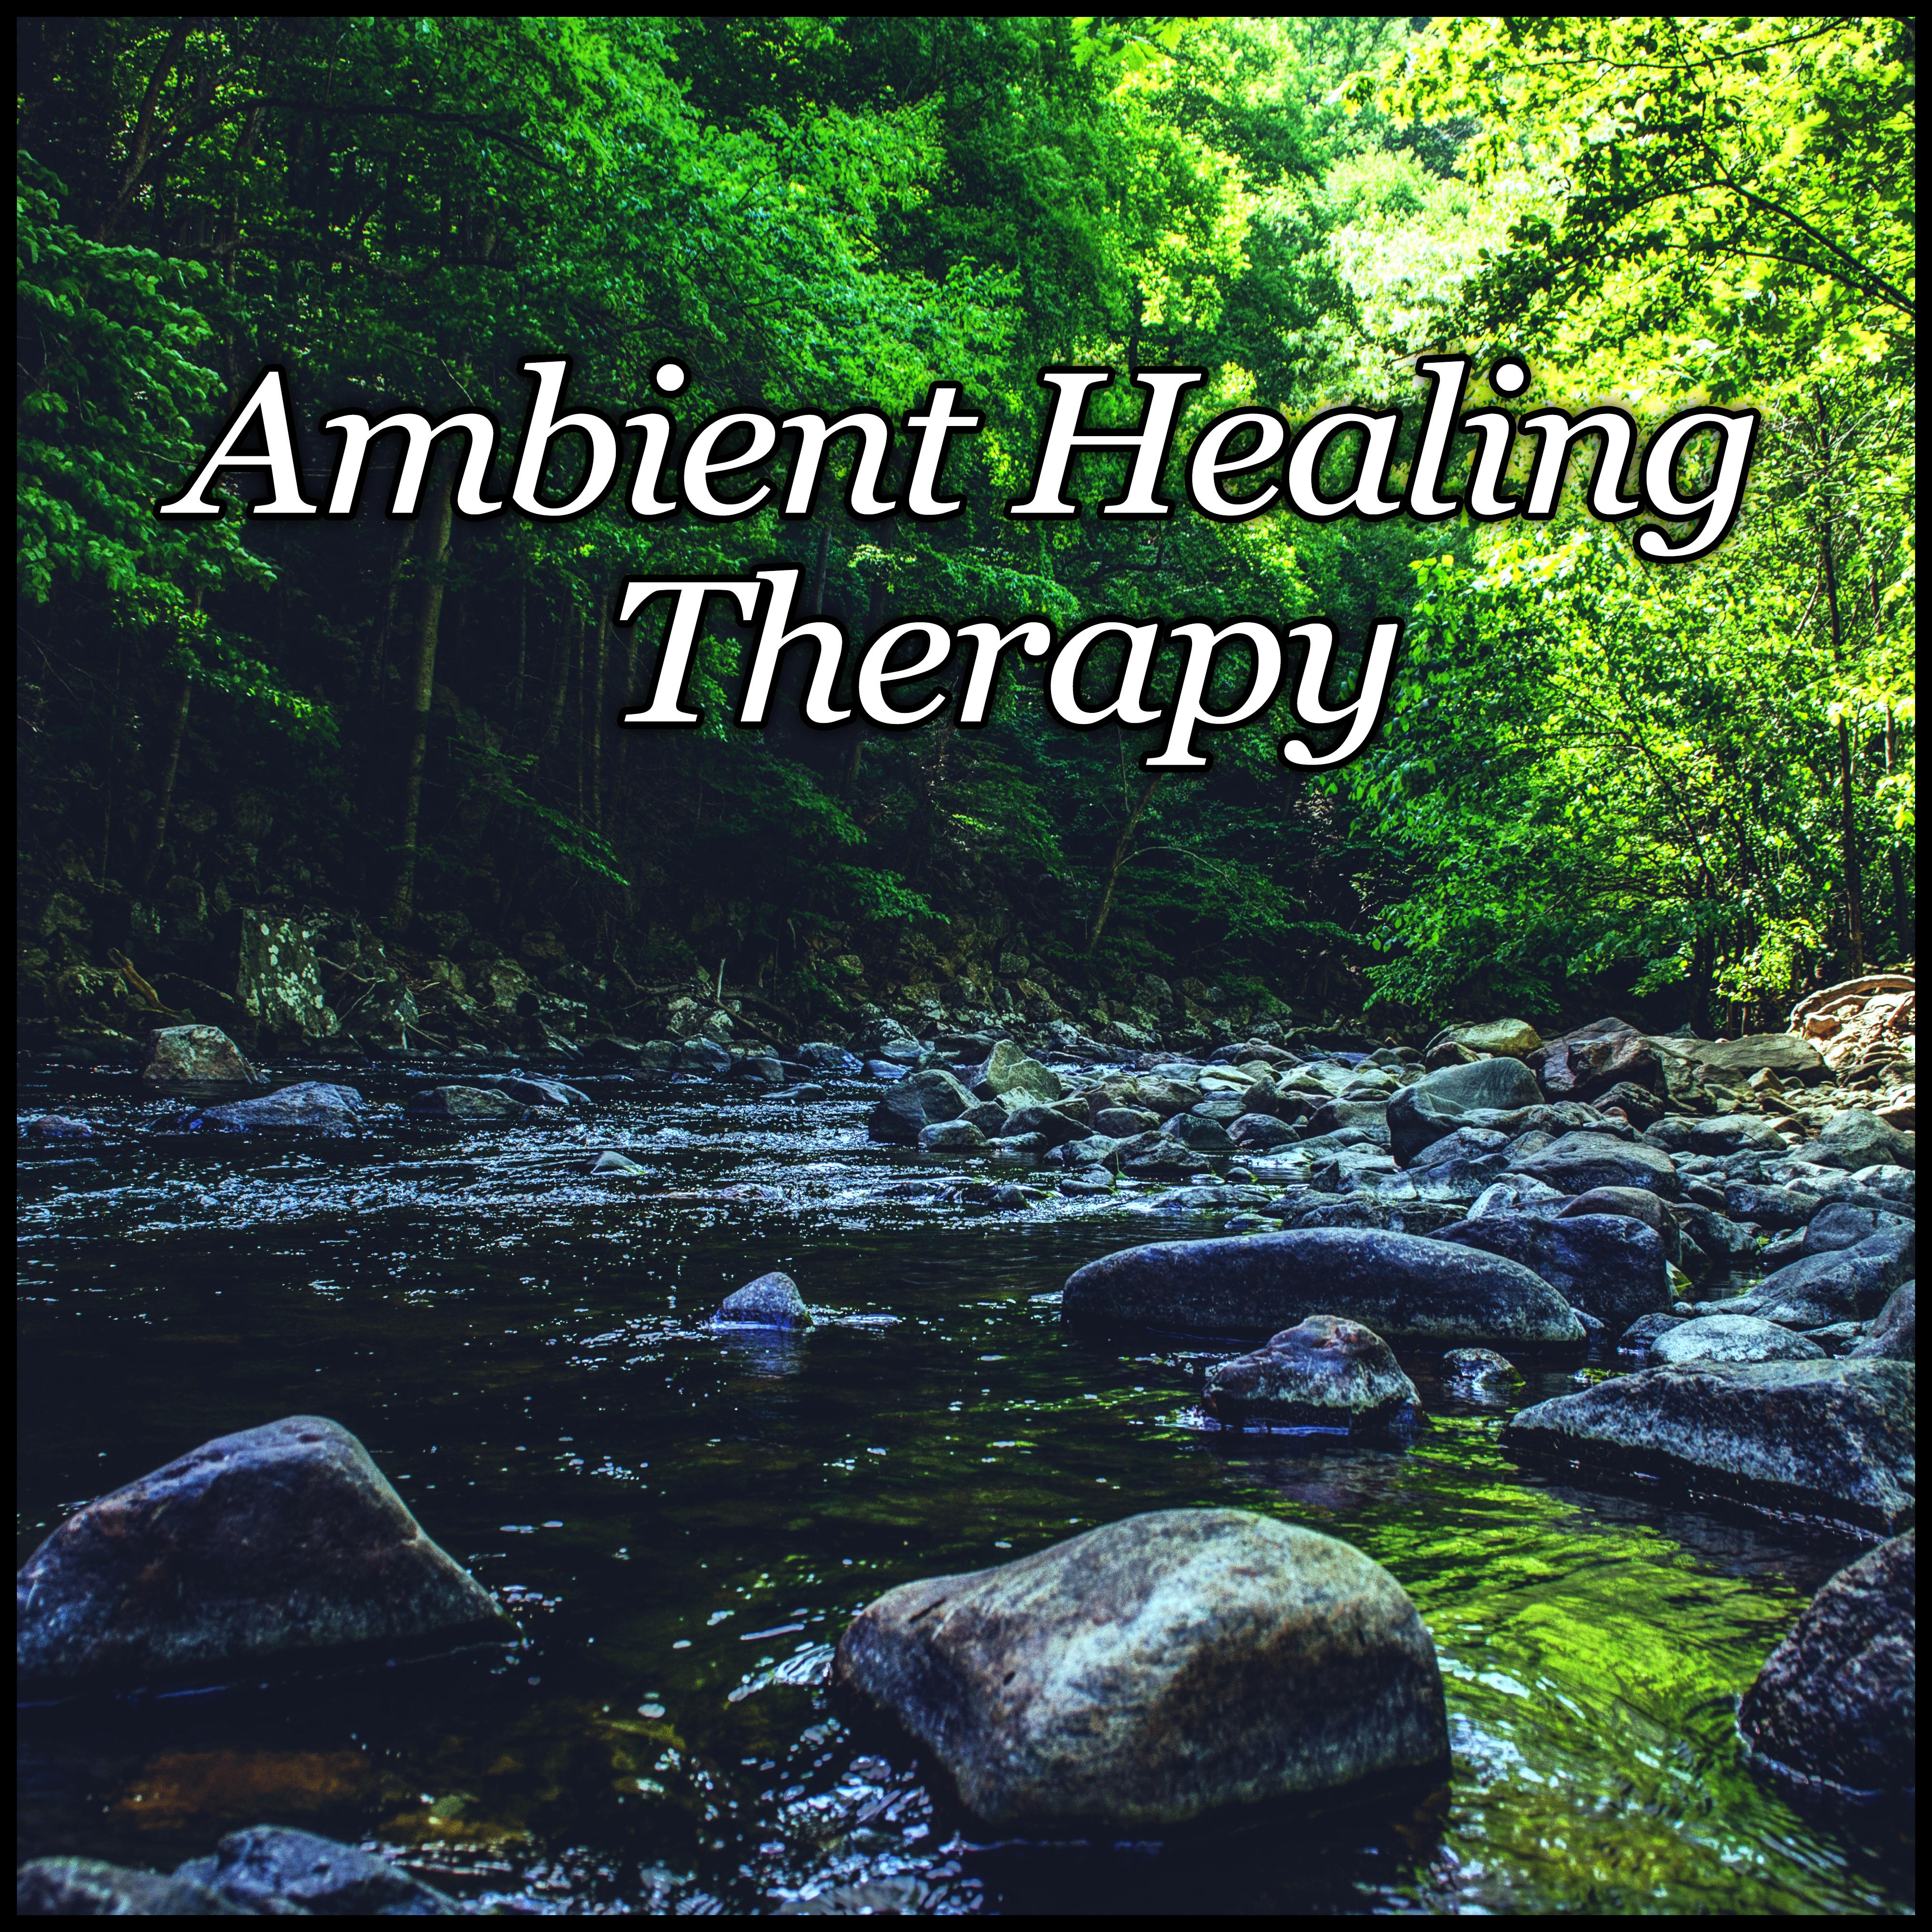 Ambient Healing Therapy – Pure Relaxation, Zen Serenity, Meditation Music, Tranquility Spa, Deep Relaxation, Calming Water, Spa Music